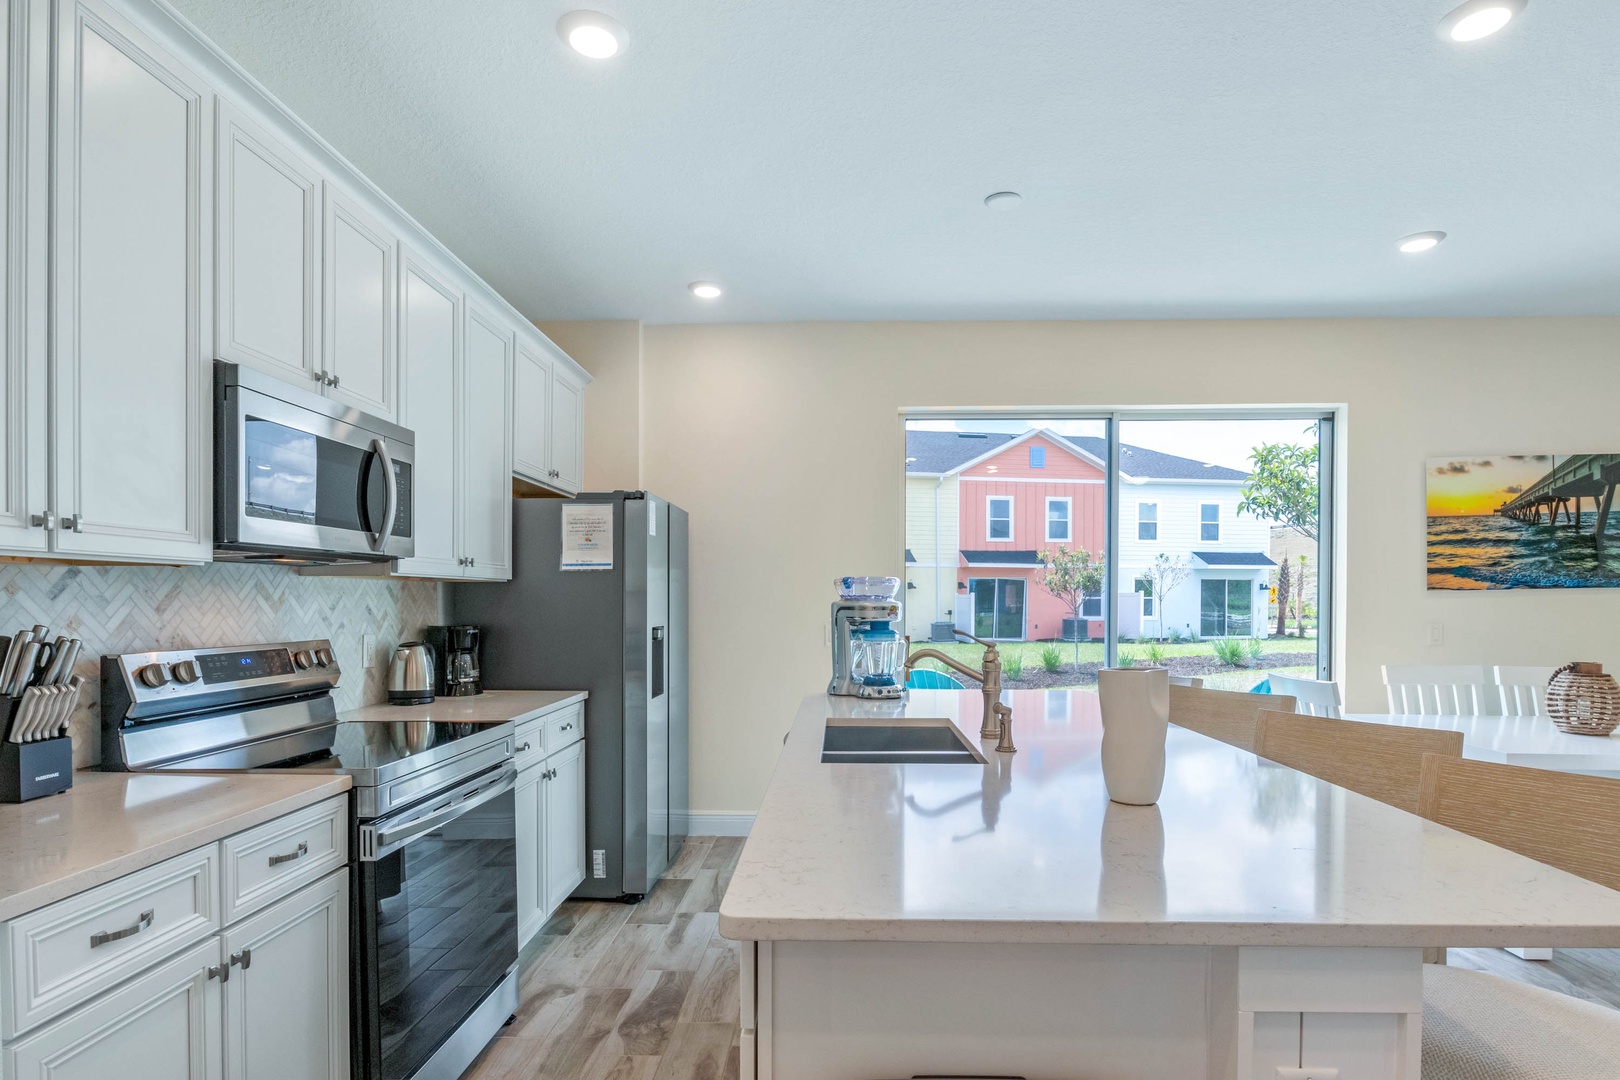 The Kitchen offers ample counter space with seating for 4 at the island